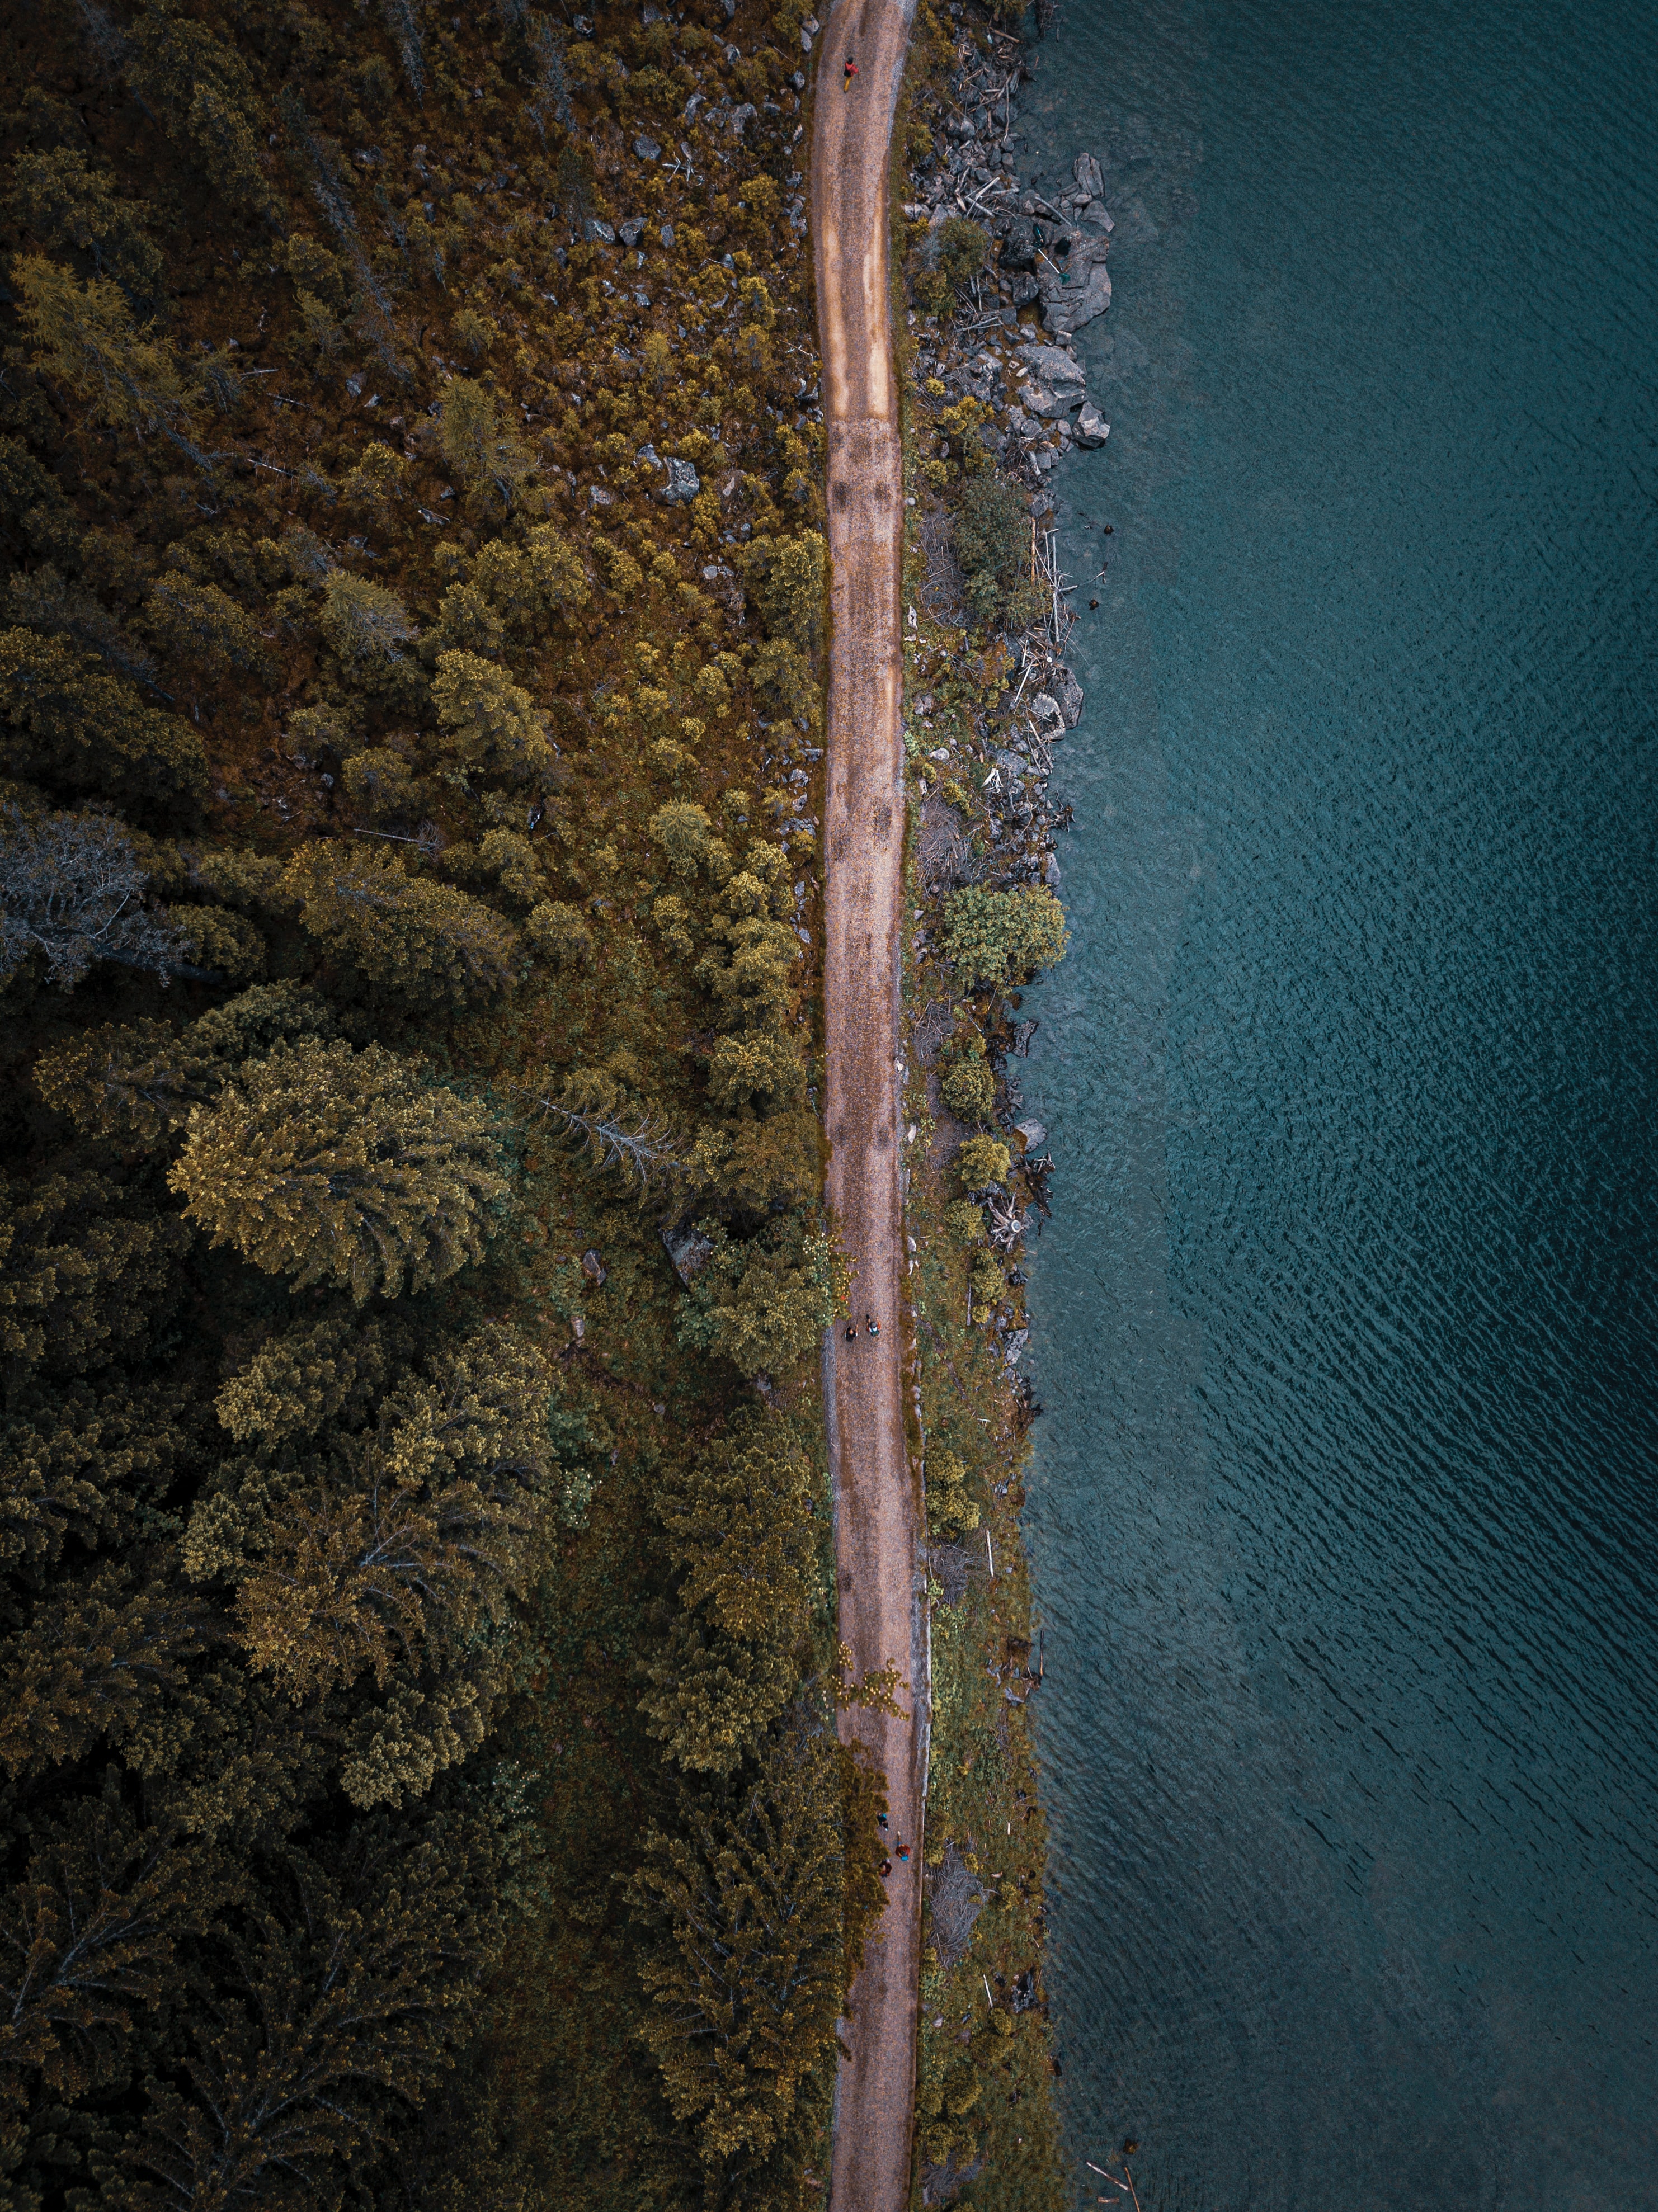 view from above, nature, trees, sea, road, forest phone background